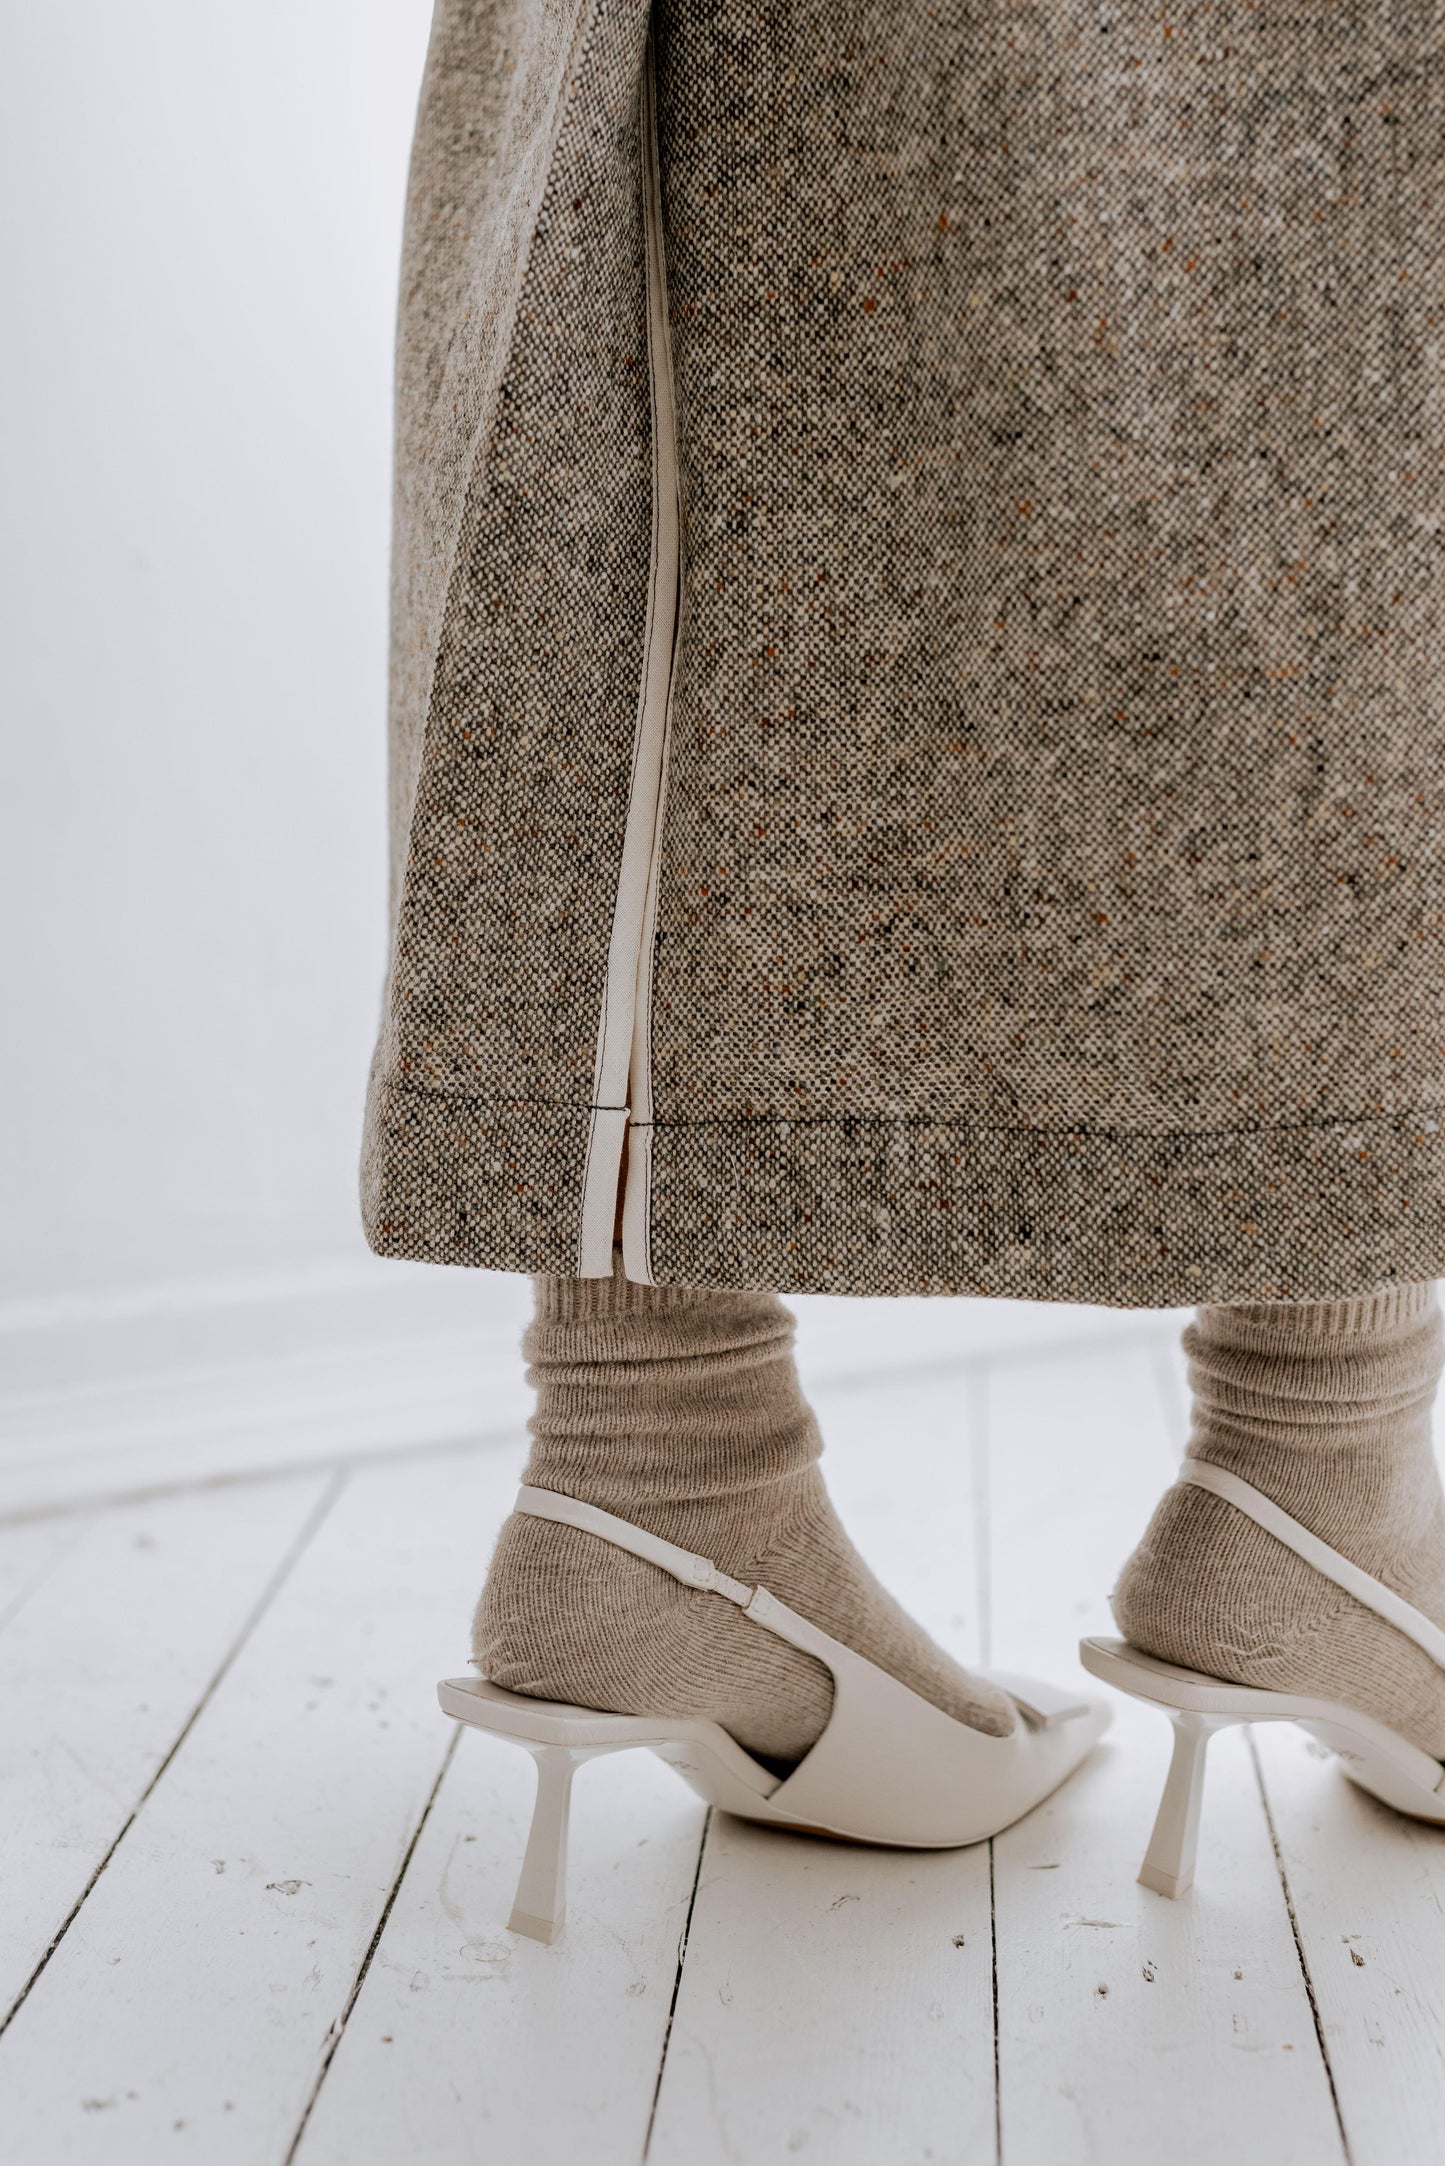 TWEED SKIRT | We are so delighted to introduce a big new step for us as a brand by introducing Donegal Tweed to our core collection. An expansion of our deep love and passion for Irish textiles and keeping our rich heritage alive- originating in Co Donega